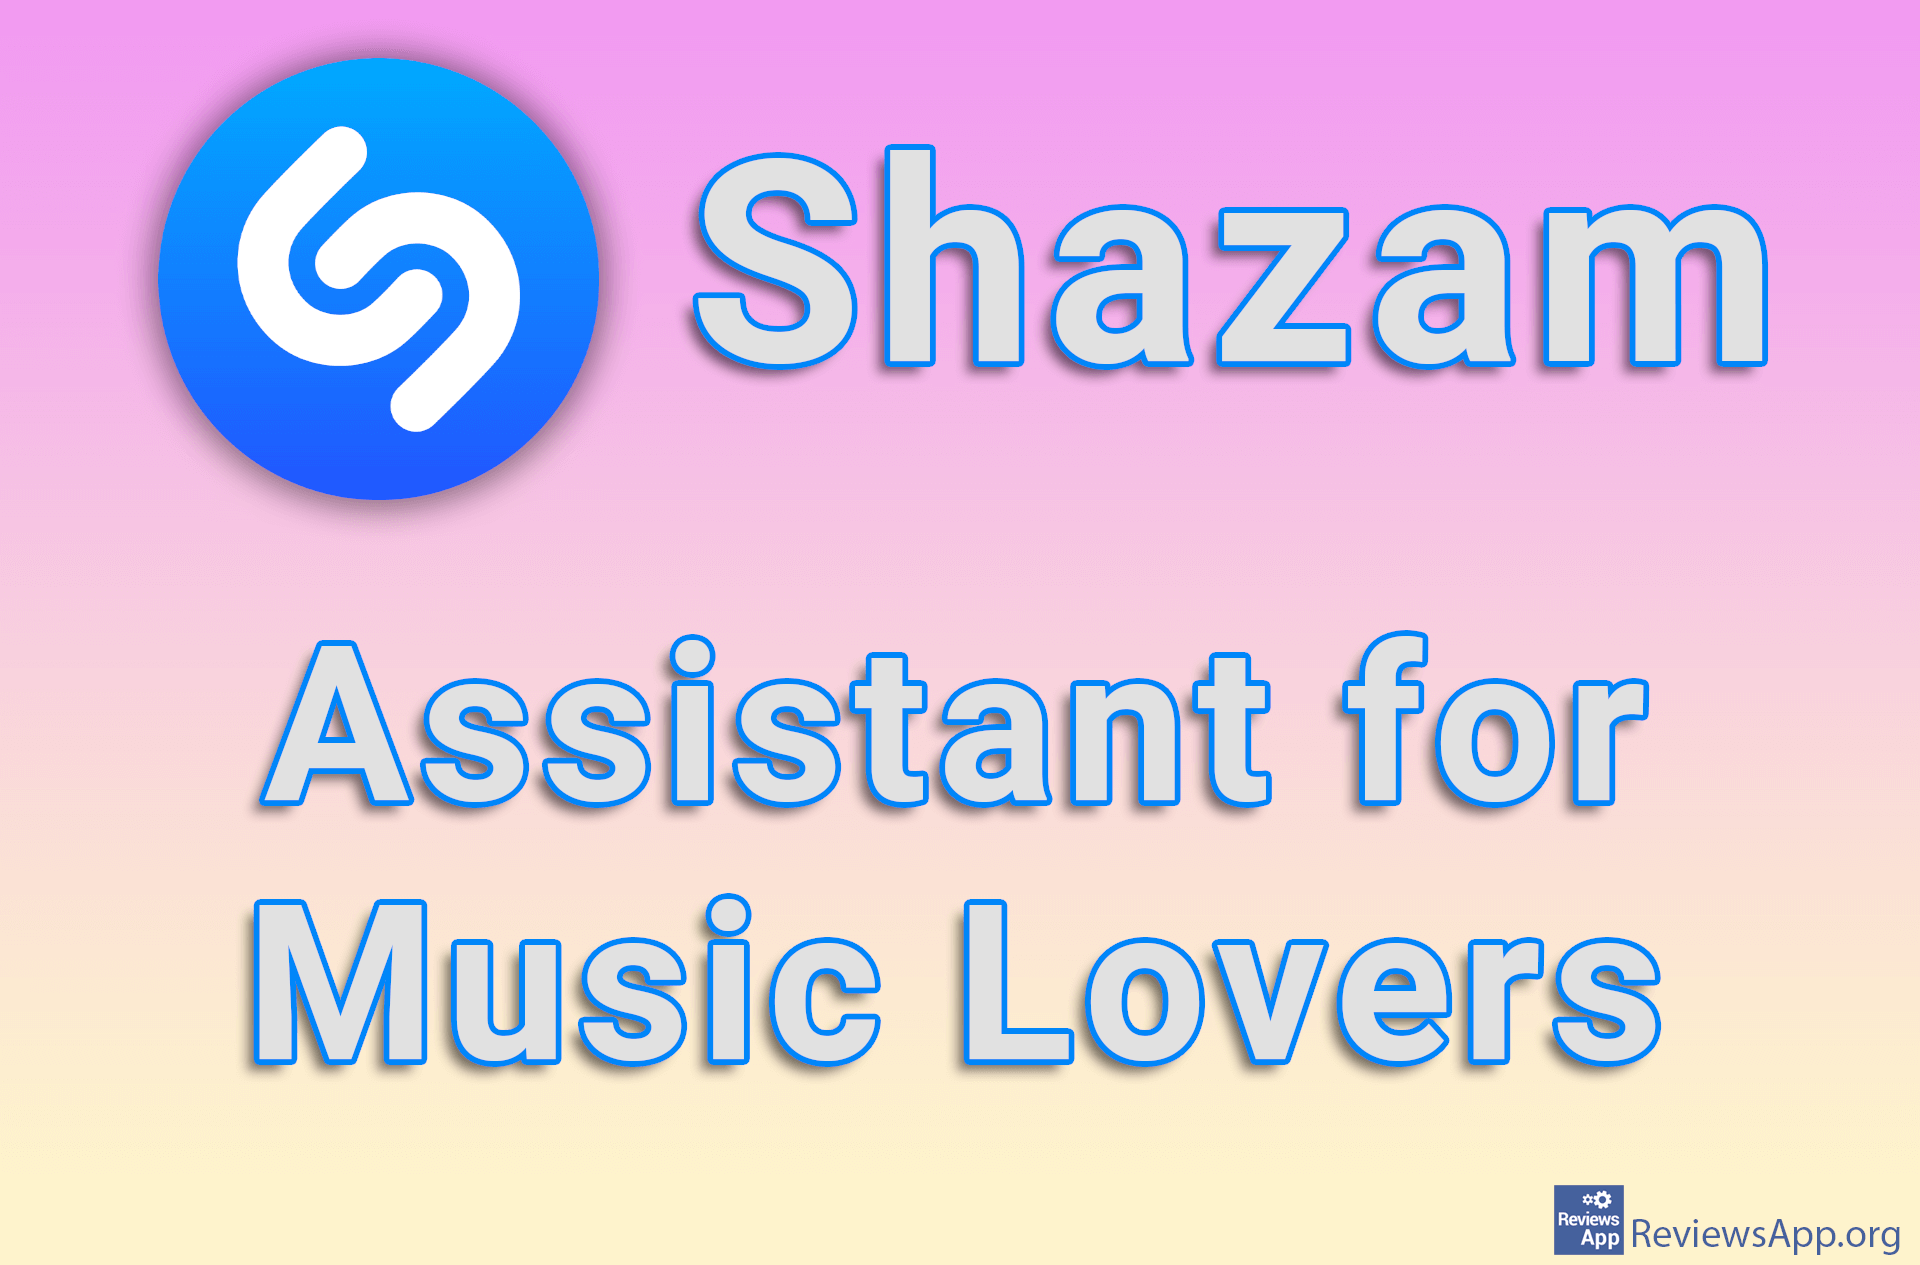 Shazam – Assistant for Music Lovers